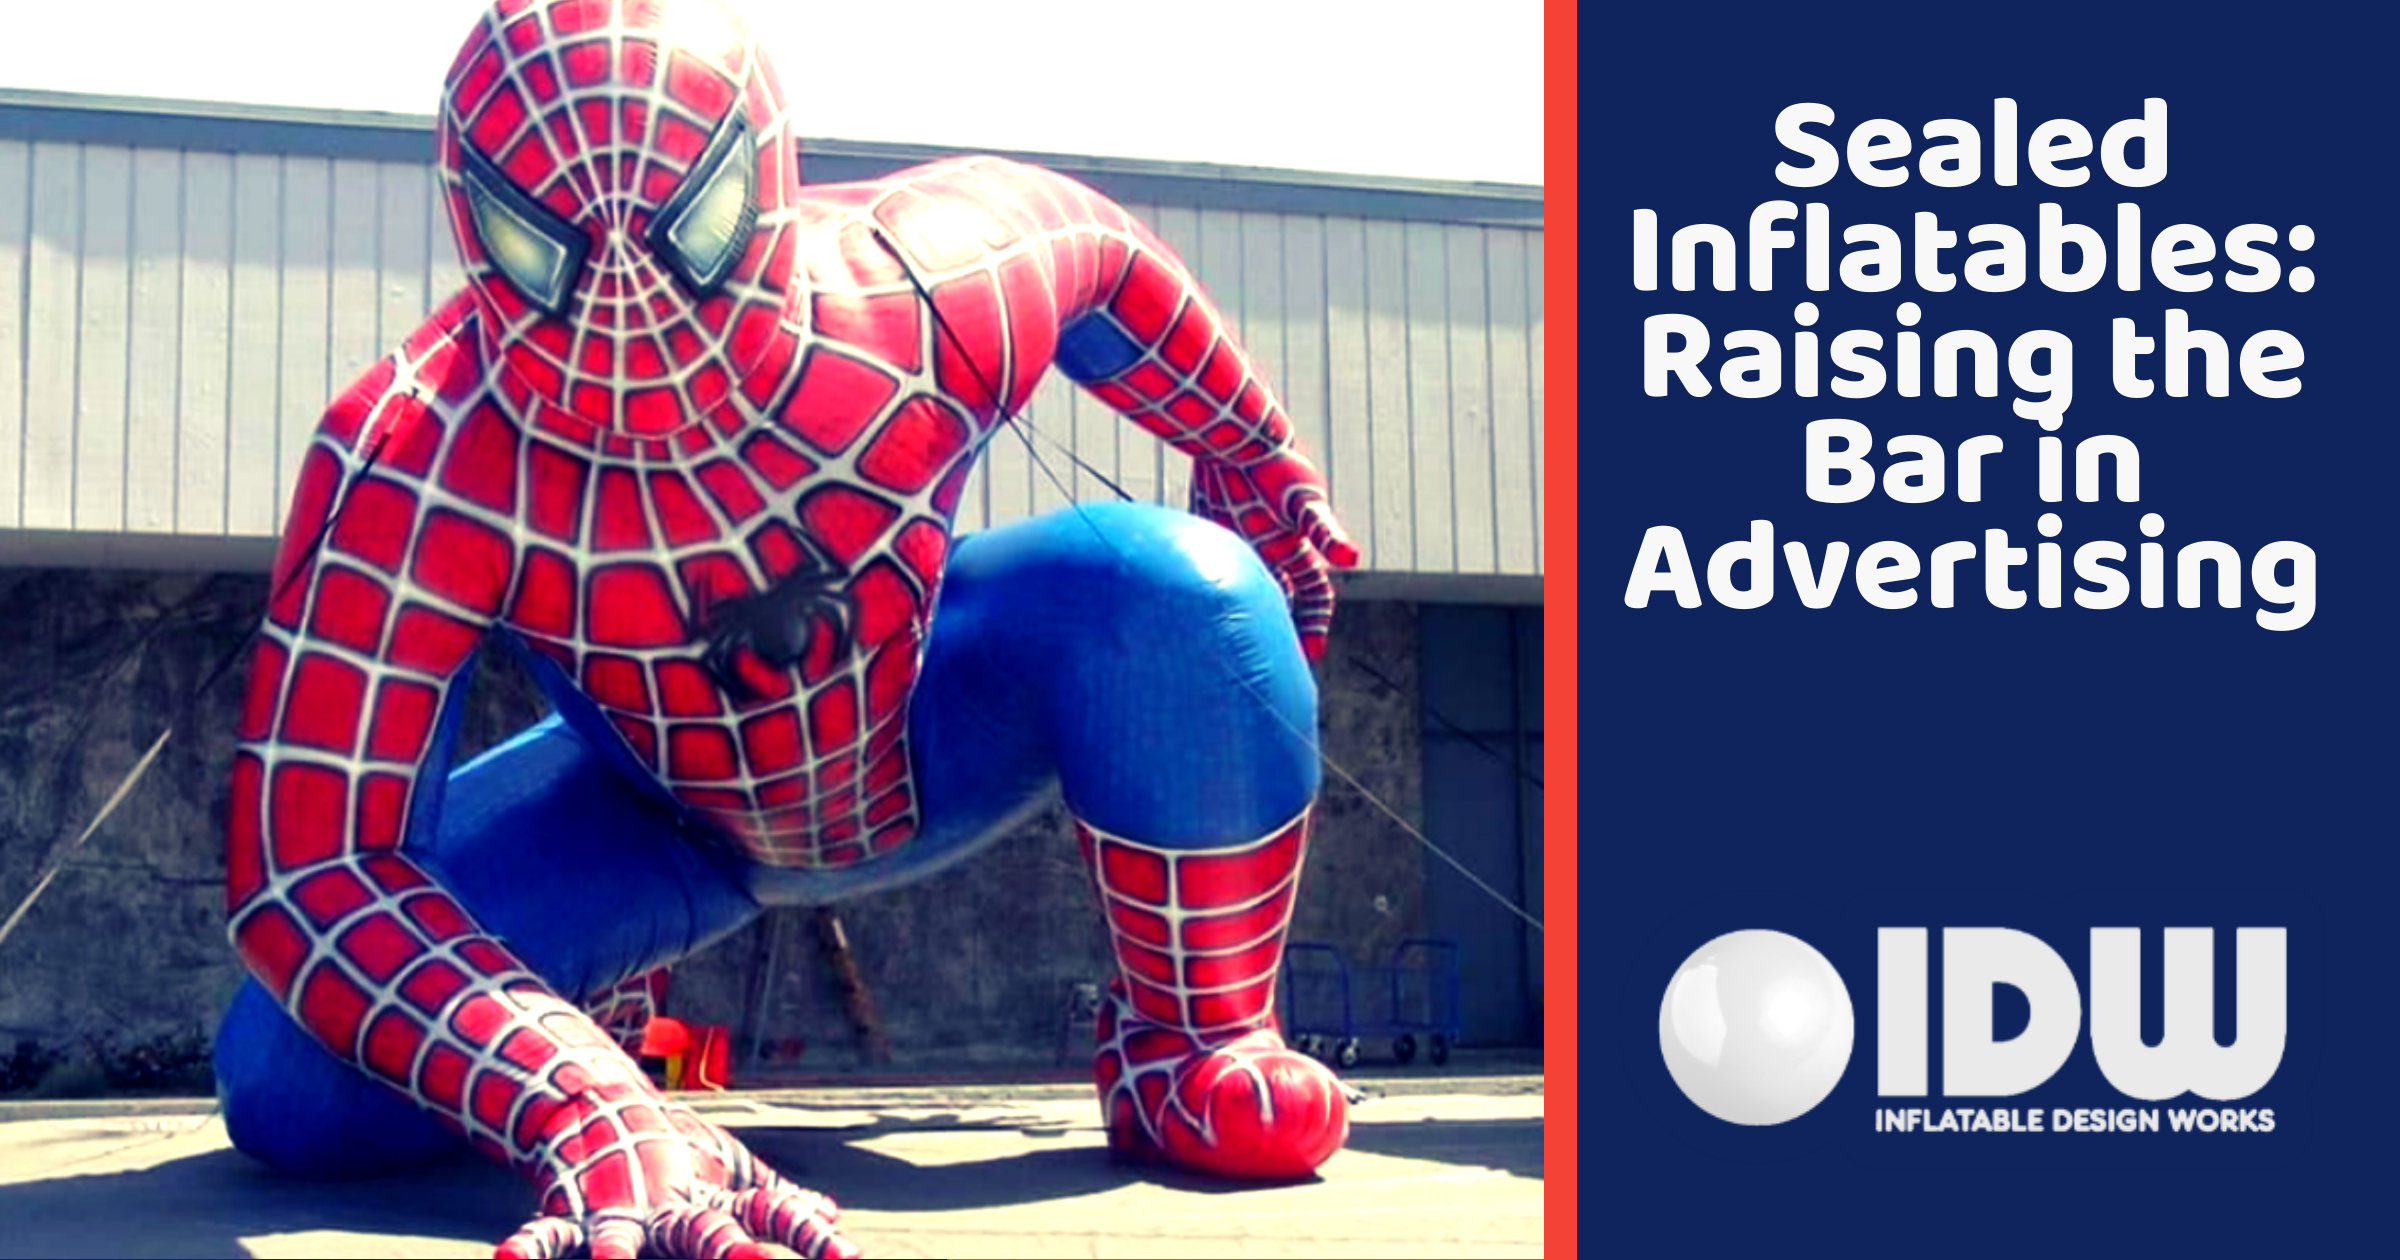 Sealed Inflatables: Raising the Bar in Advertising